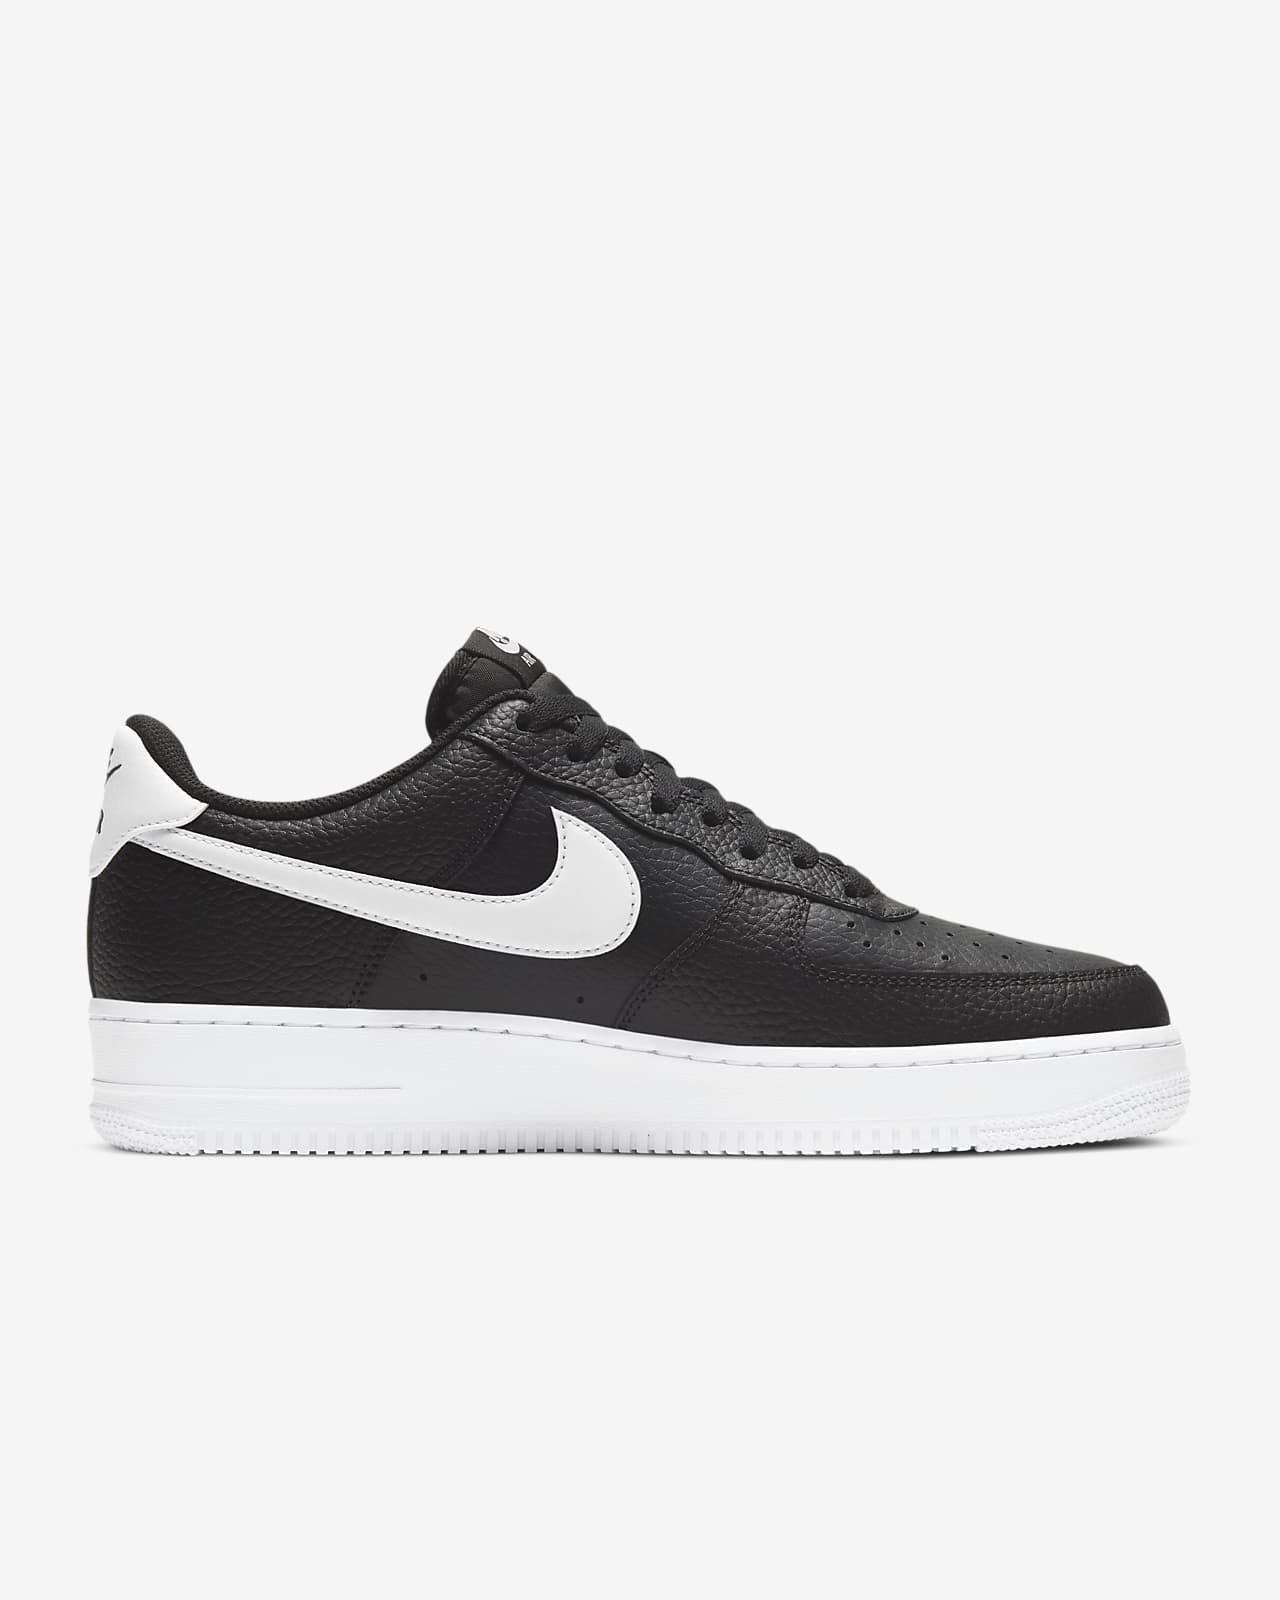 Nike Men's Air Force 1 '07 LV8 Shoes in Black, Size: 10 | Dr9866-001